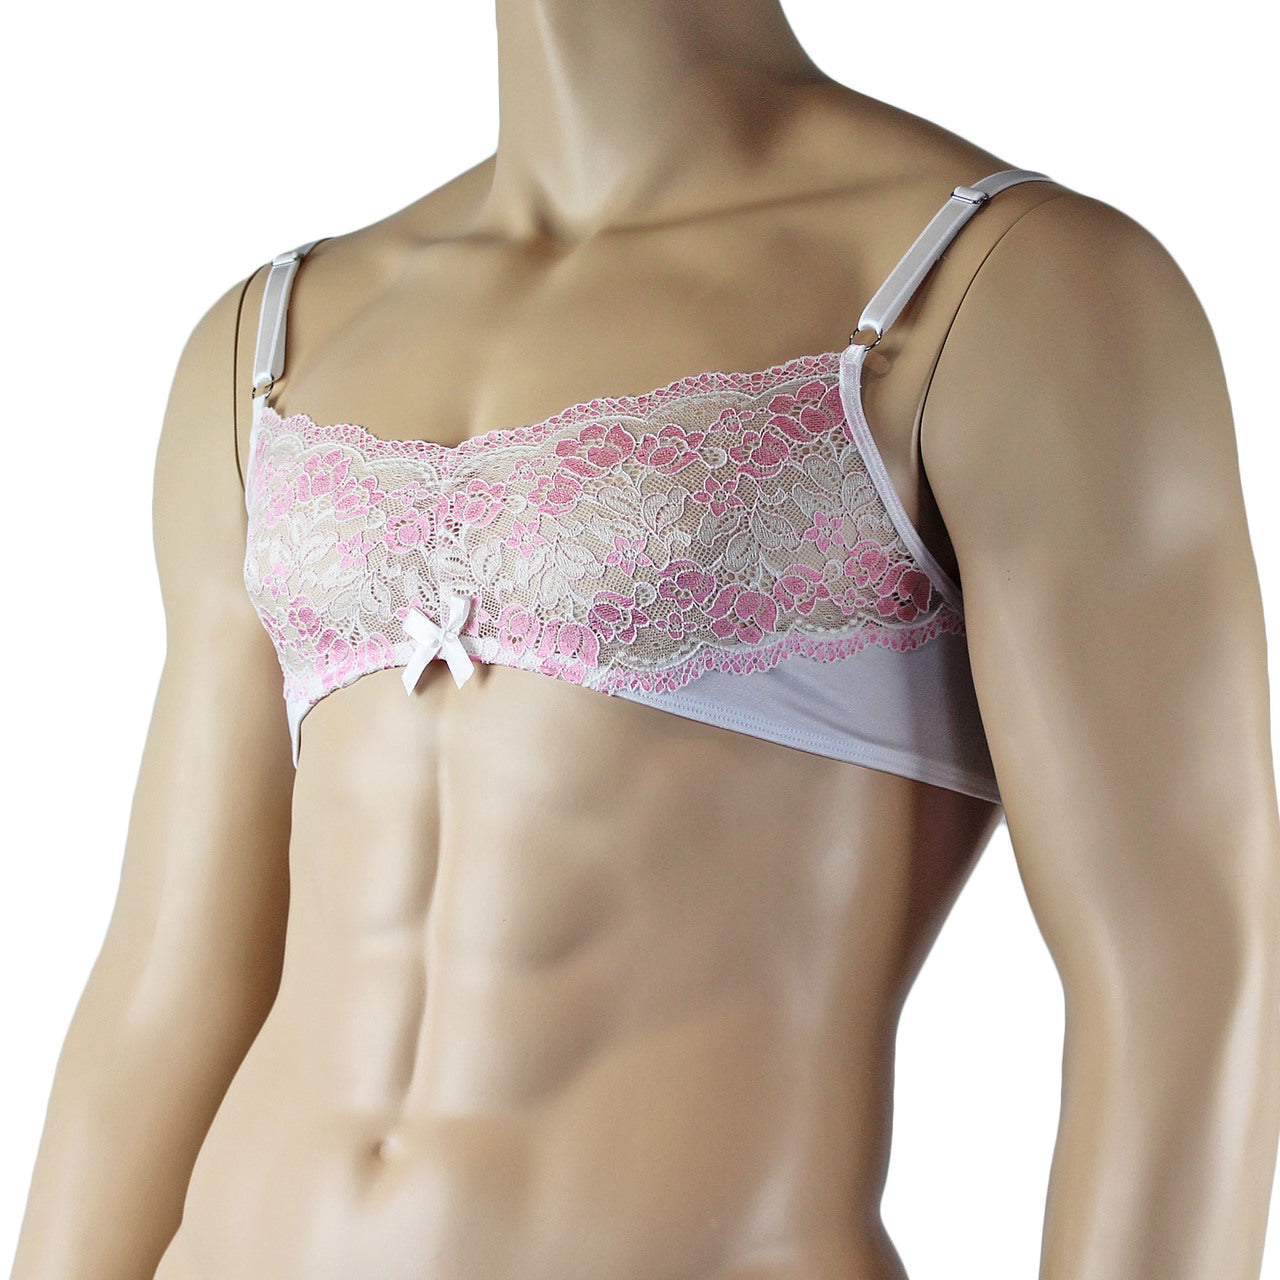 Mens Luxury Bra Top with Beautiful Lace Male Lingerie White